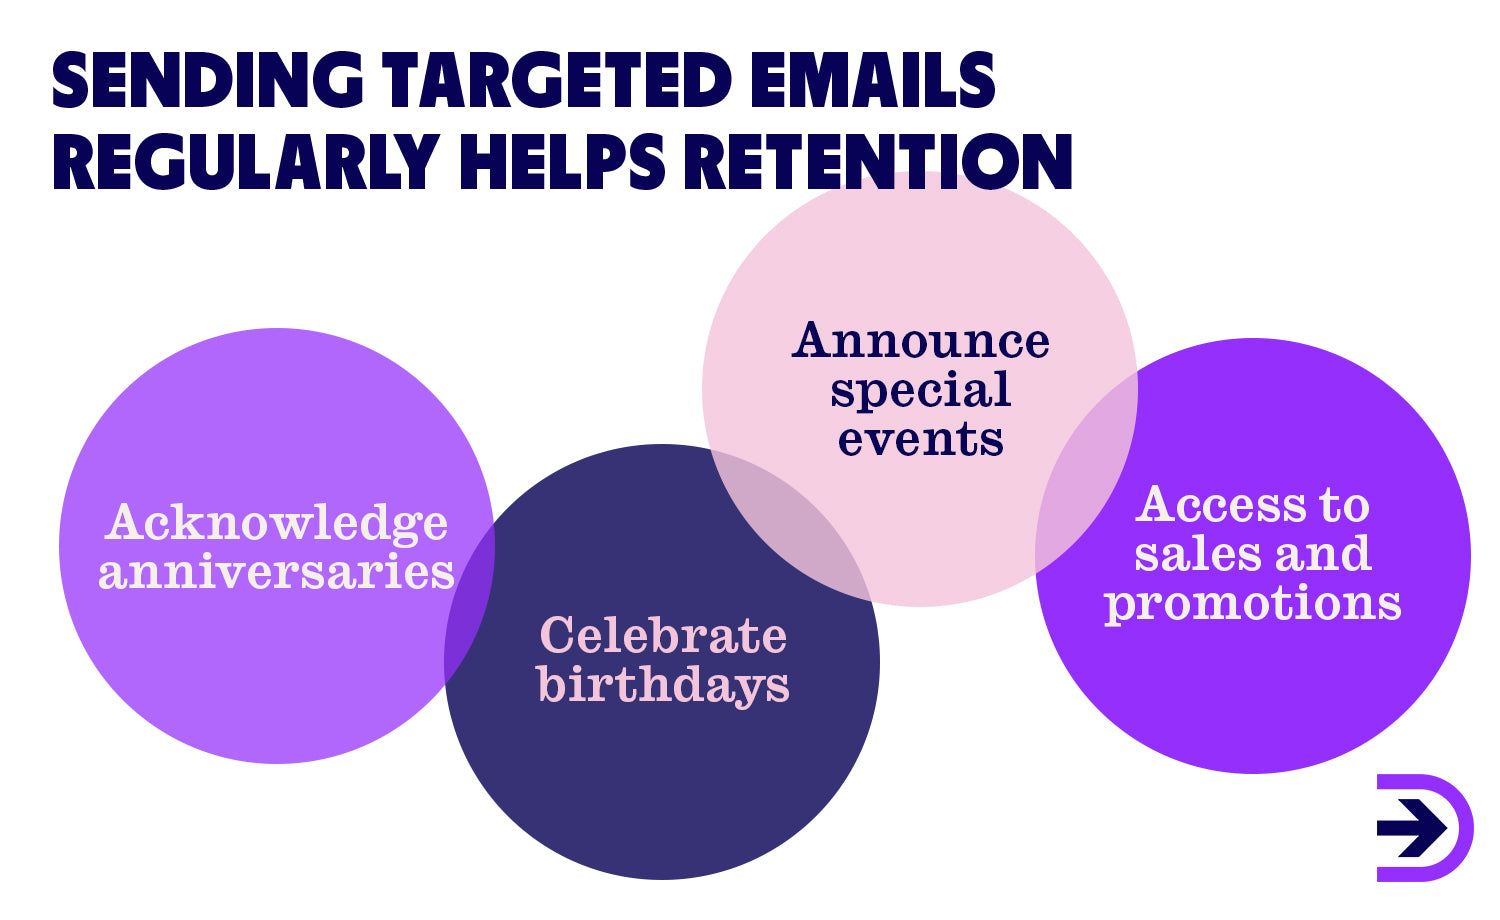 Help with your audience retention and send targeted campaigns to your subscribers.